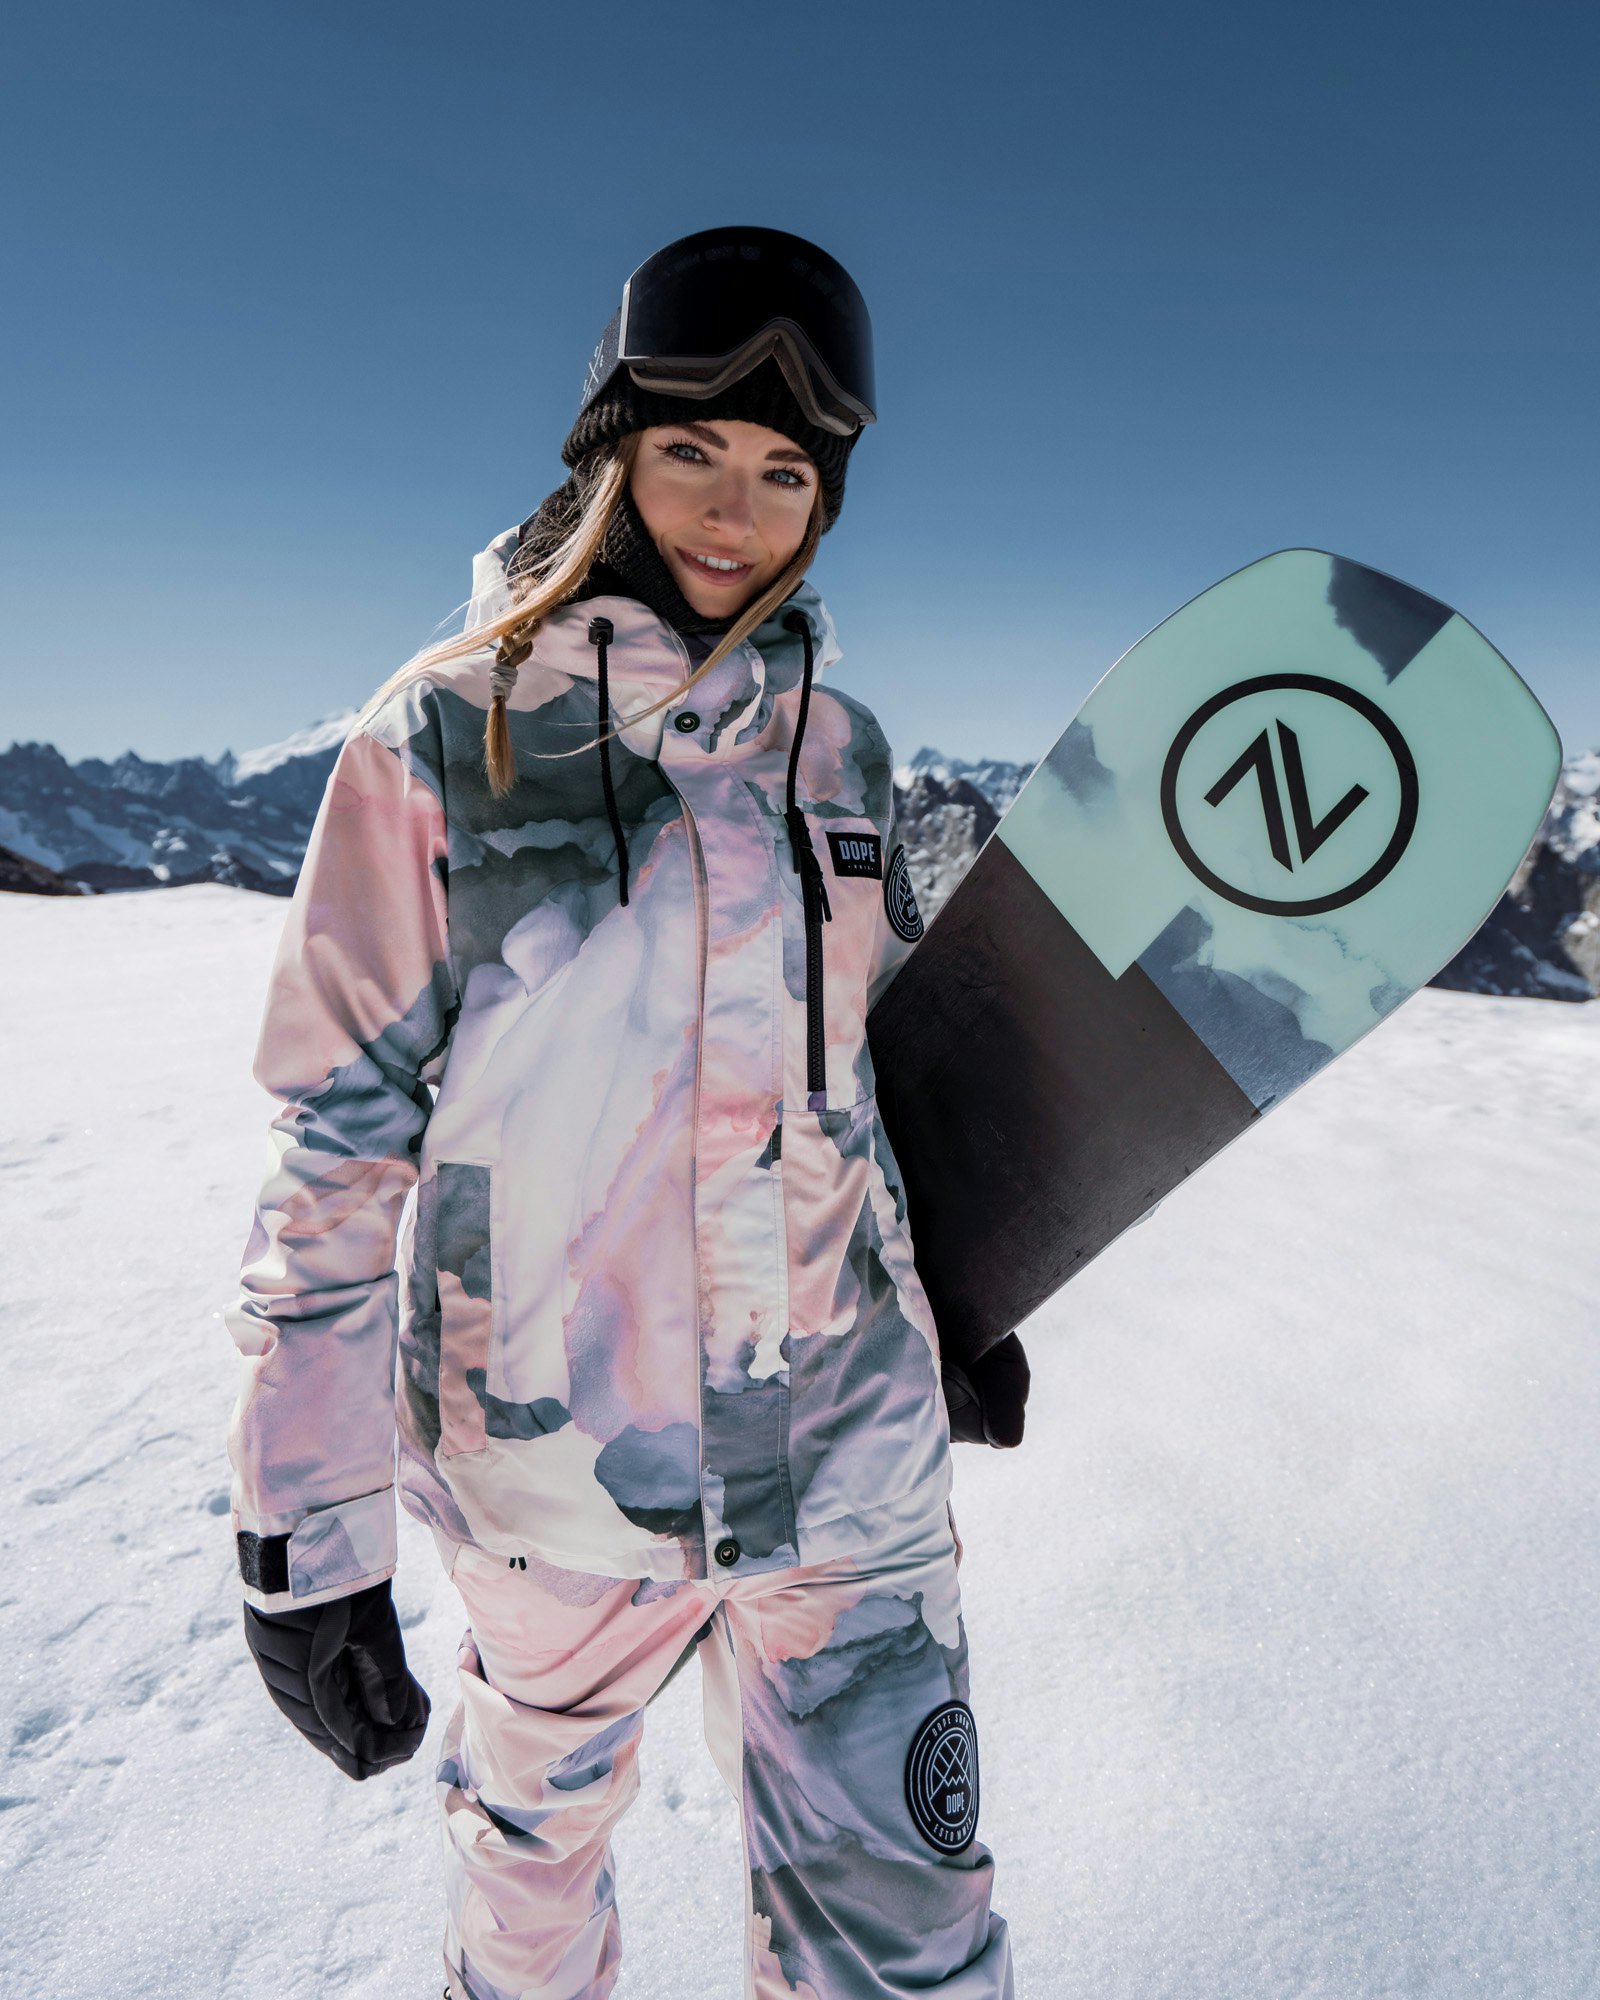 Which type of snowboard is best for beginners?